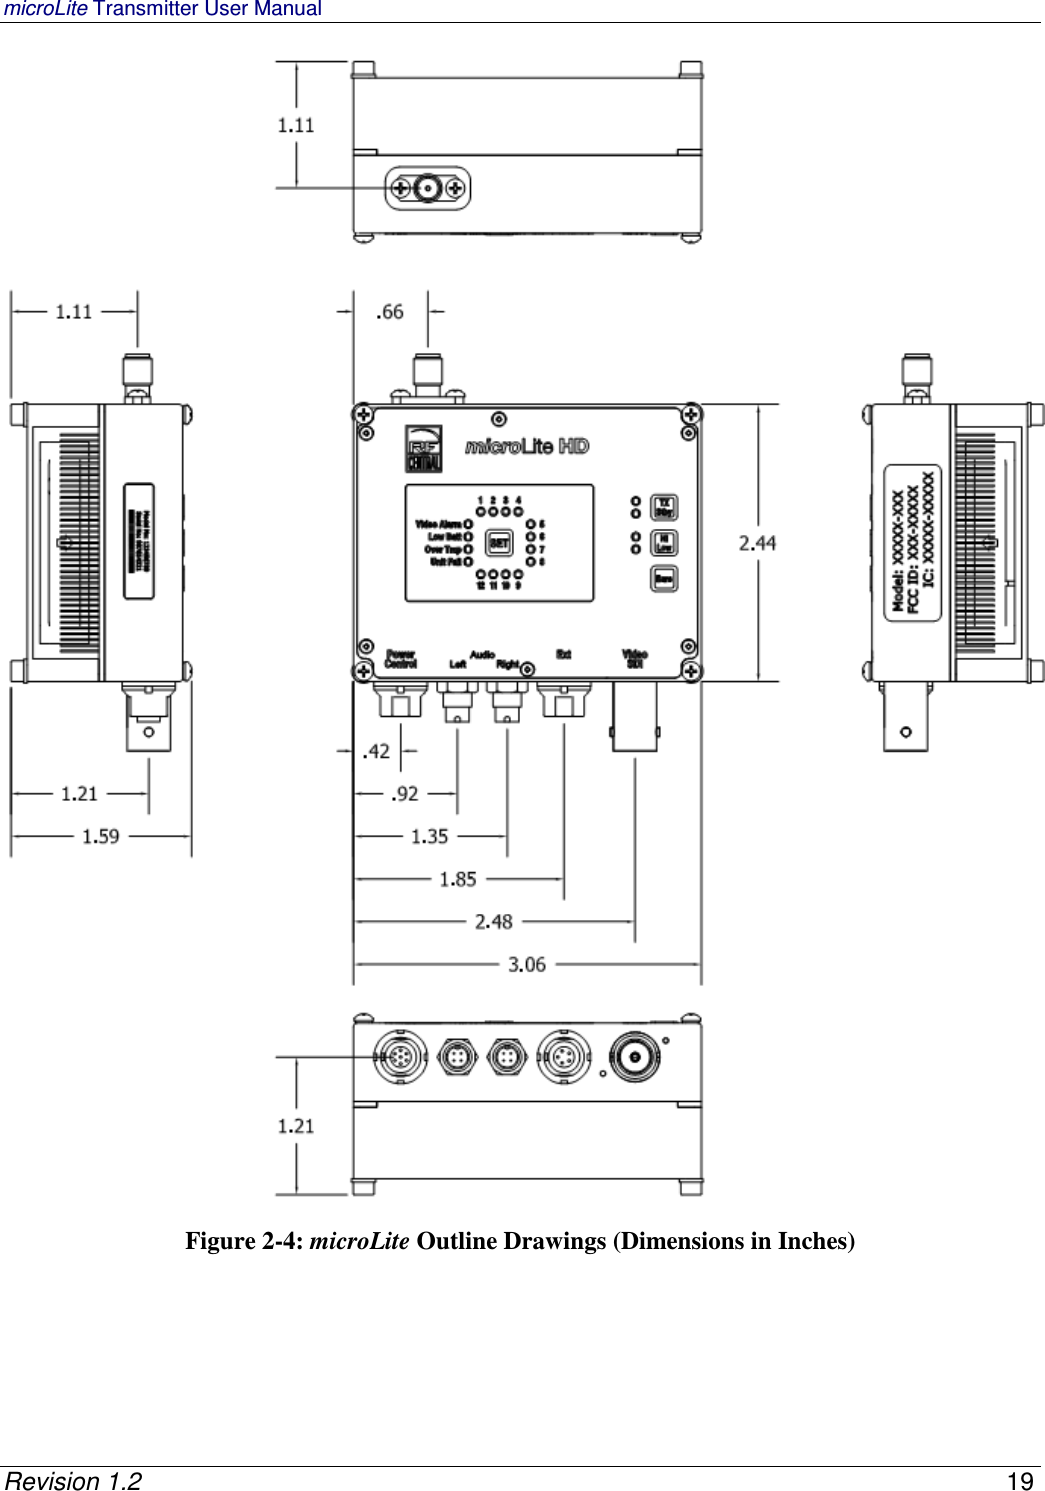 microLite Transmitter User Manual   Revision 1.2    19   Figure 2-4: microLite Outline Drawings (Dimensions in Inches)  